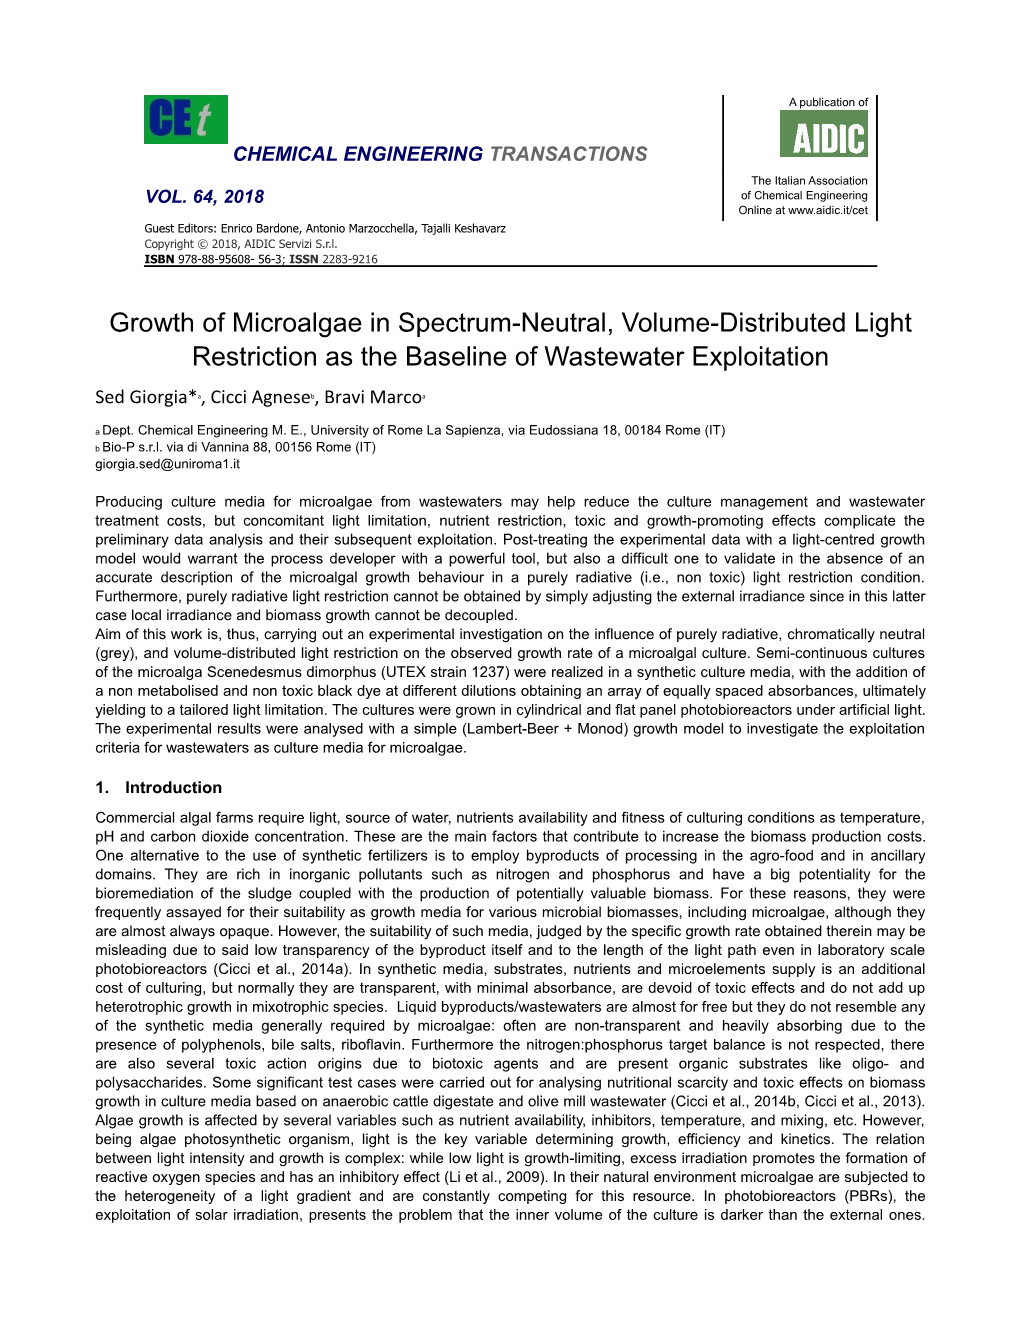 Growth of Microalgae in Spectrum-Neutral, Volume-Distributed Light Restriction As the Baseline